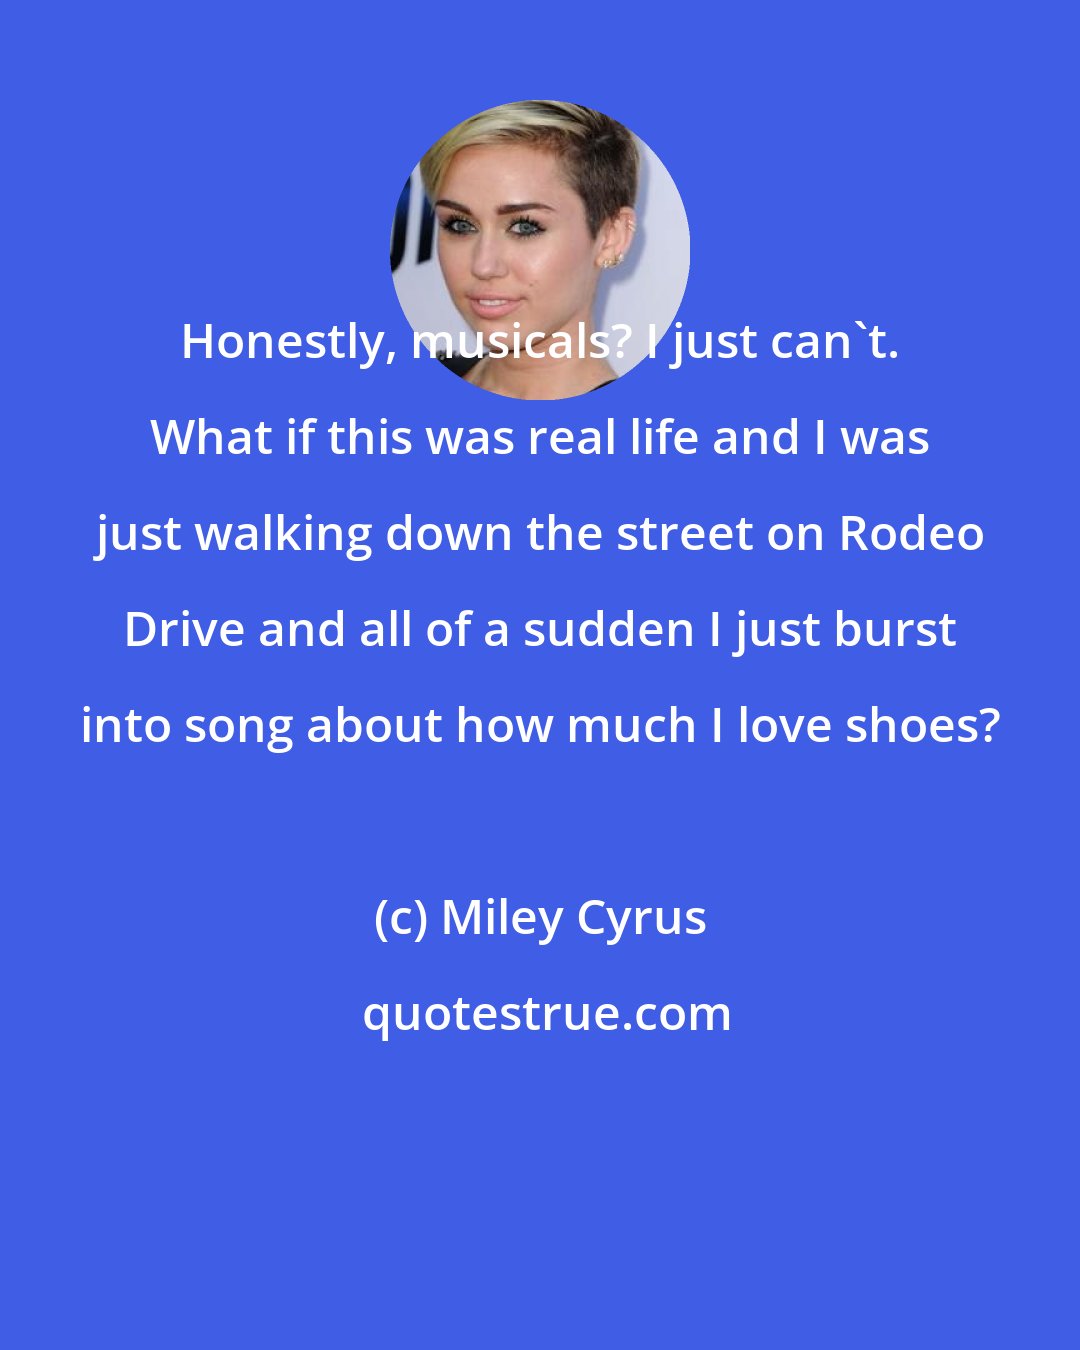 Miley Cyrus: Honestly, musicals? I just can't. What if this was real life and I was just walking down the street on Rodeo Drive and all of a sudden I just burst into song about how much I love shoes?